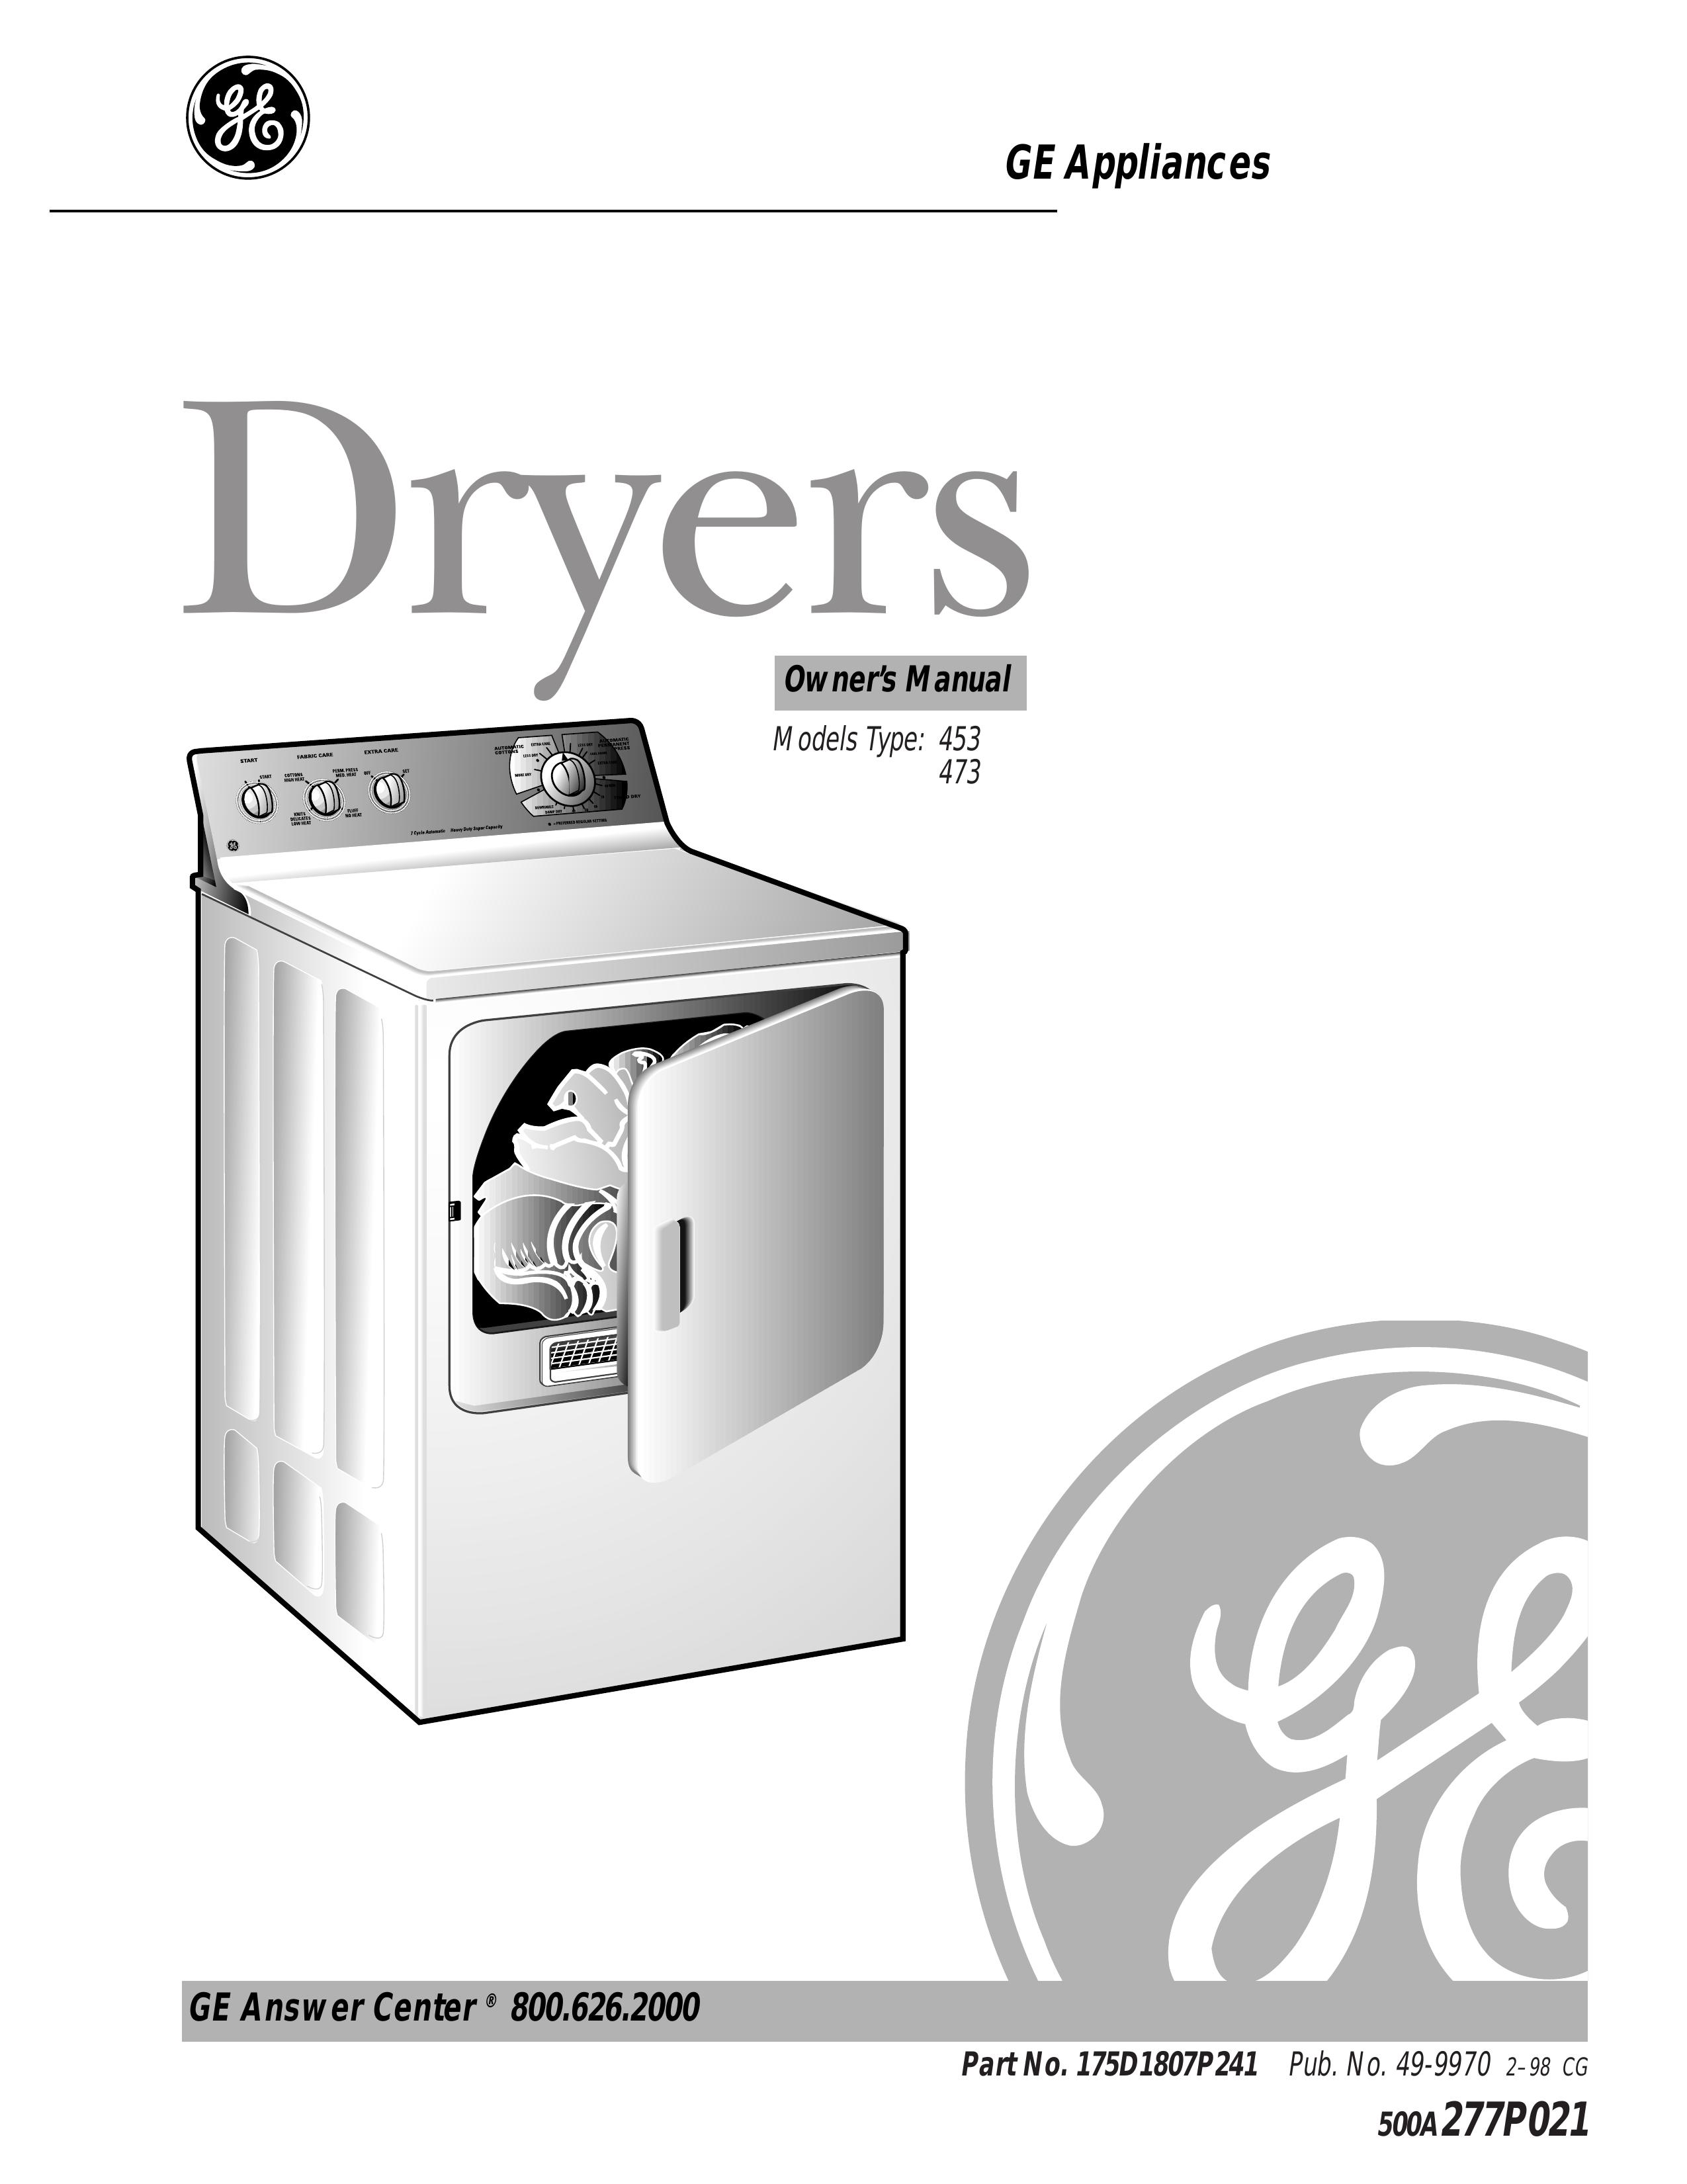 GE 175D1807P241 Clothes Dryer User Manual